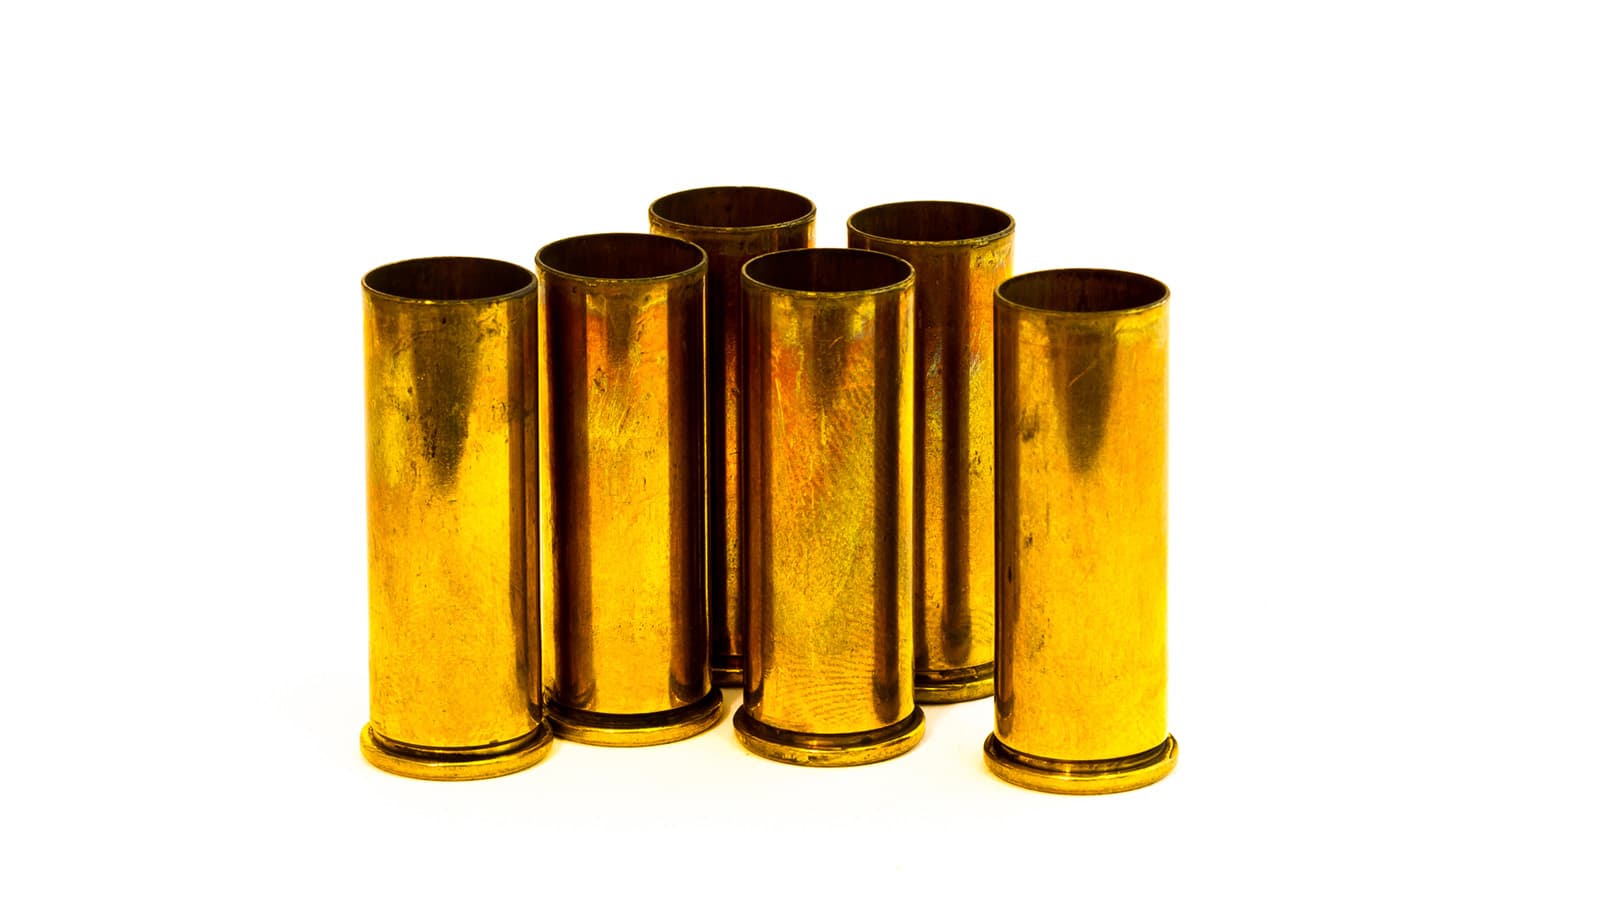 Analysis finds bias in shell casings as forensic evidence - Futurity